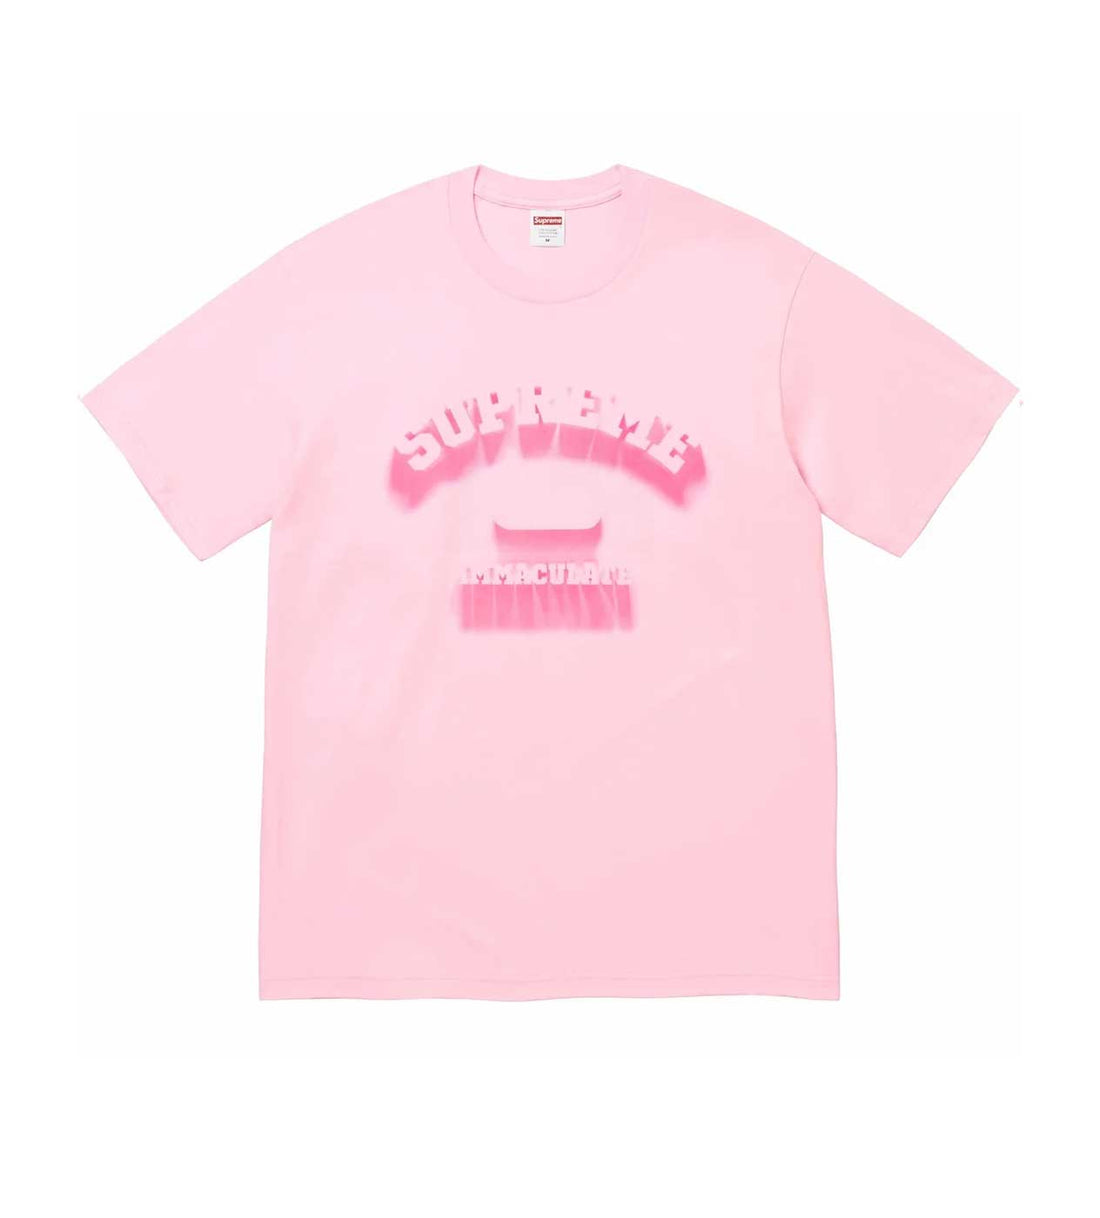 Supreme Shadow Tee Light Pink front